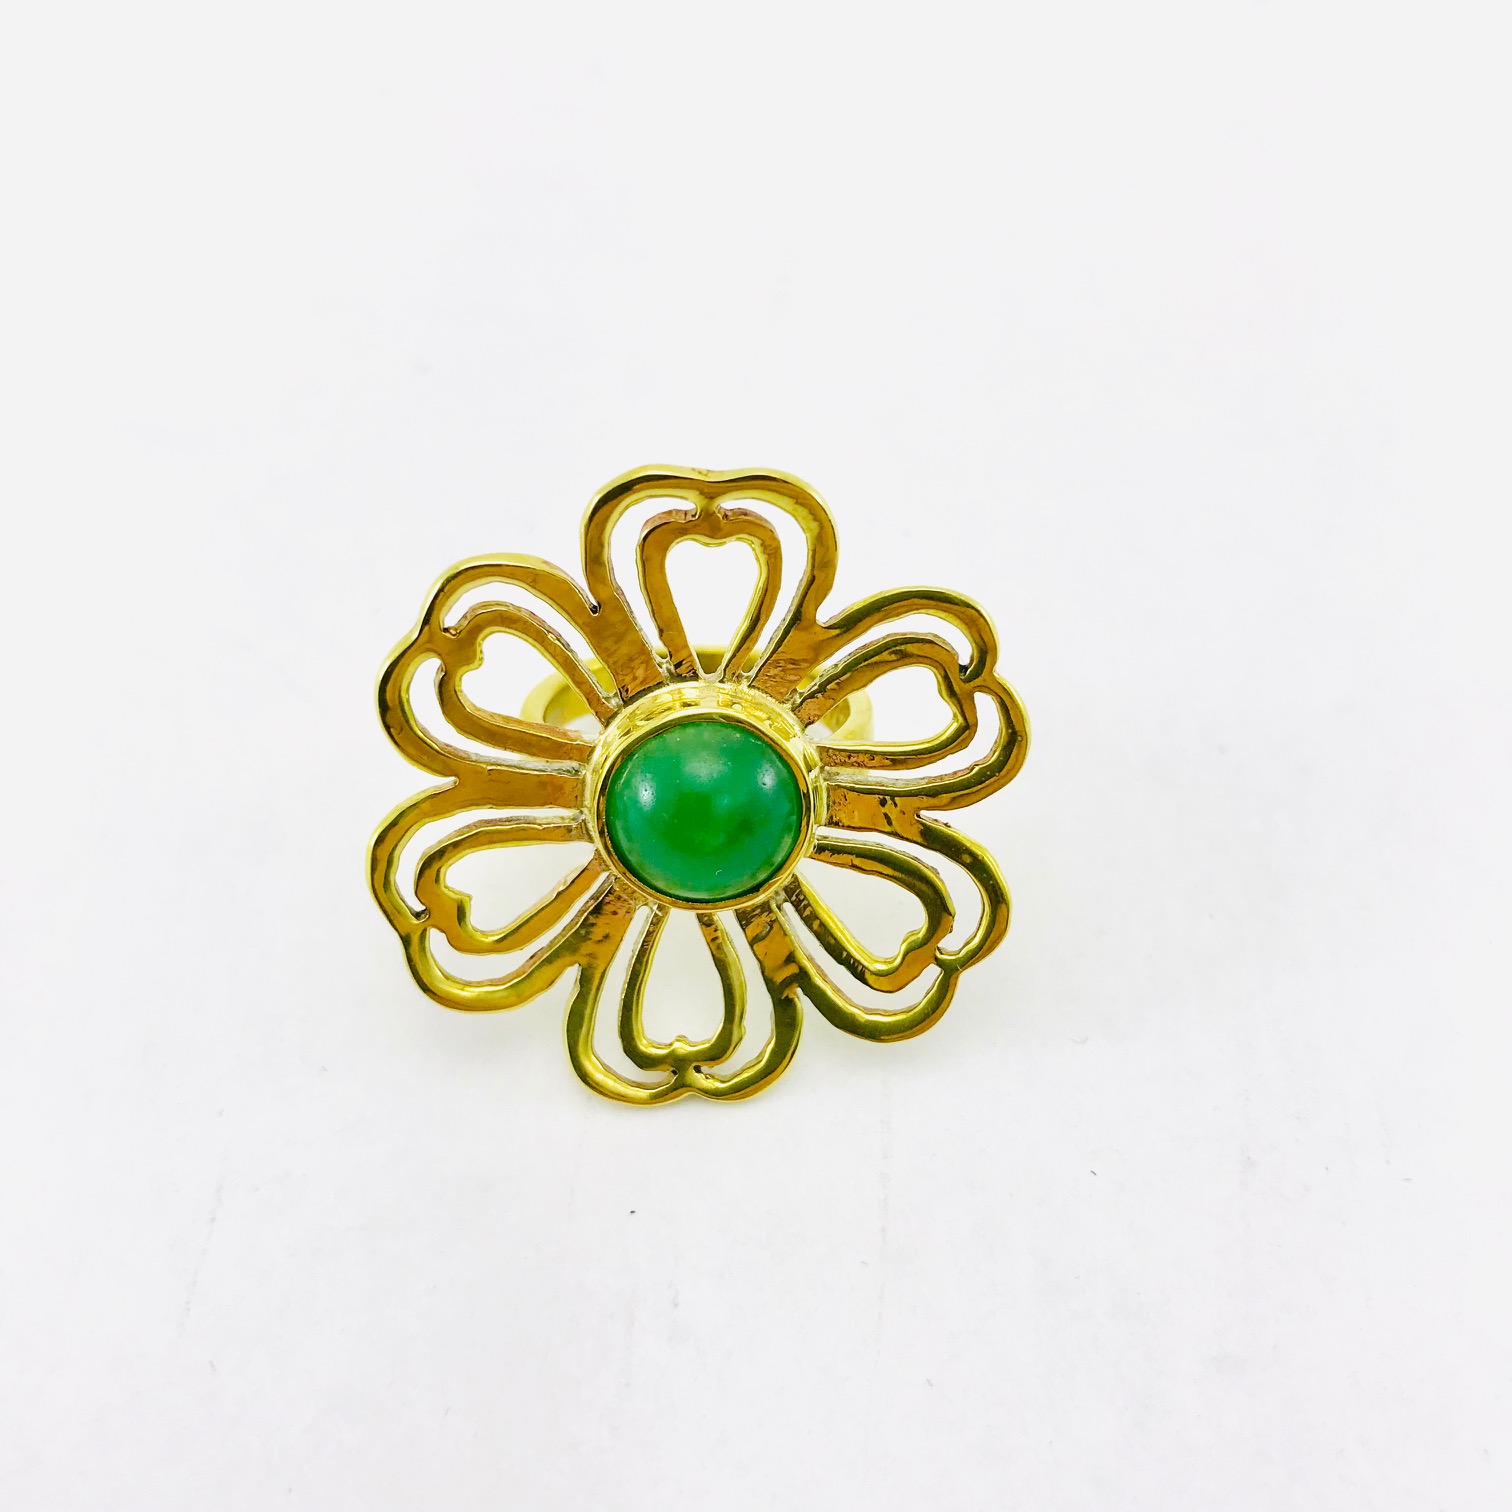 Ethical Flower Ring - Recycled Bullet Casing - Green Agate